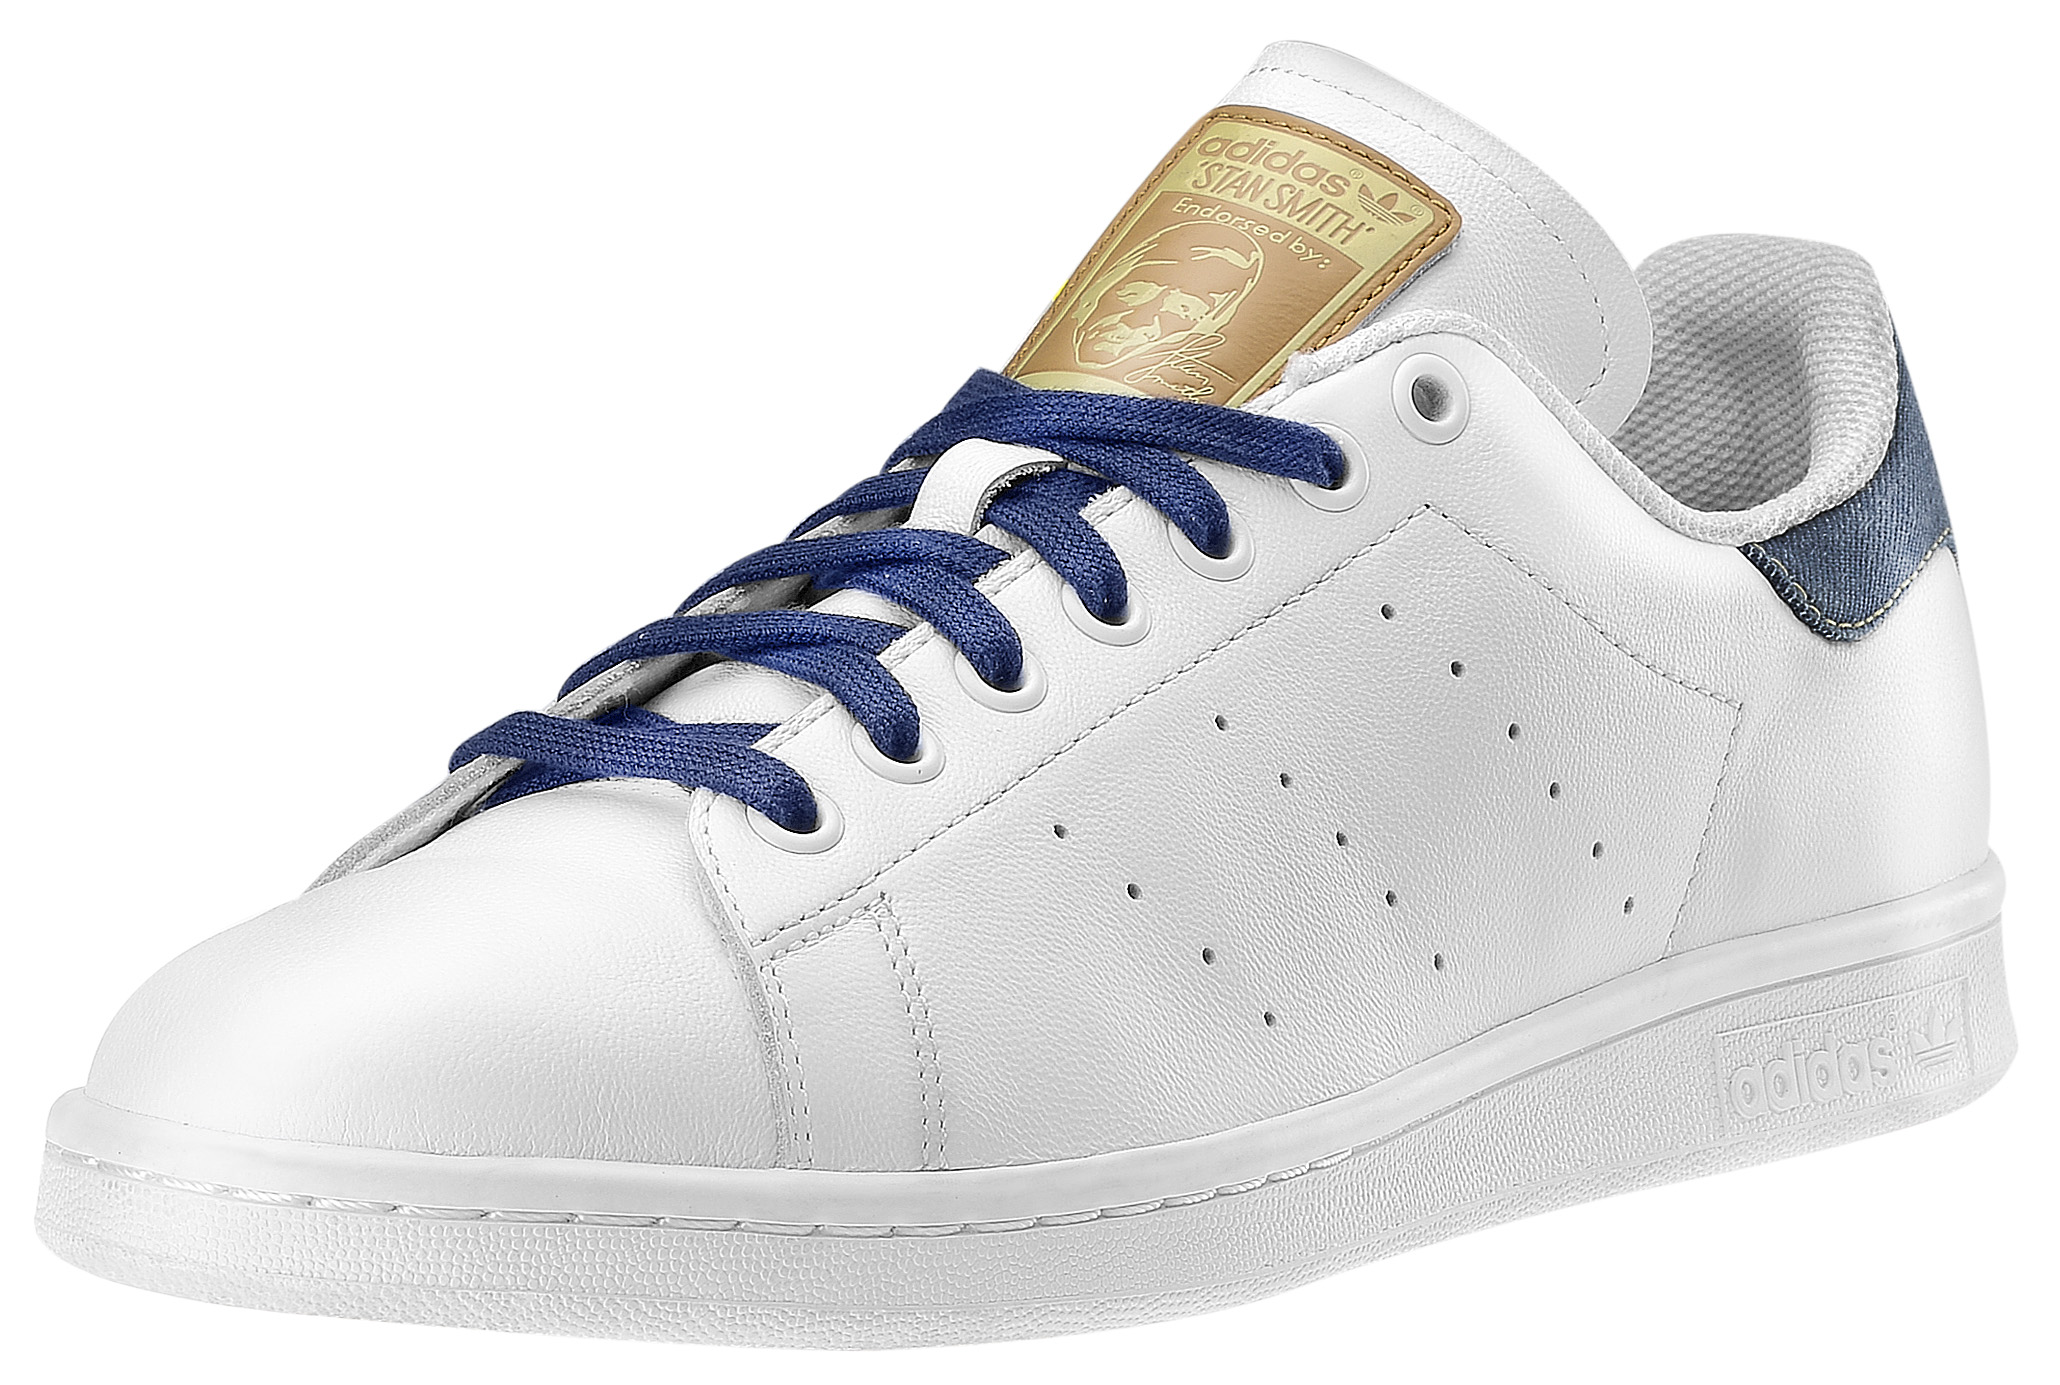 Special Sneakers made for AW Lab by Stan Smith Adidas and Diadora COLLEZIONI